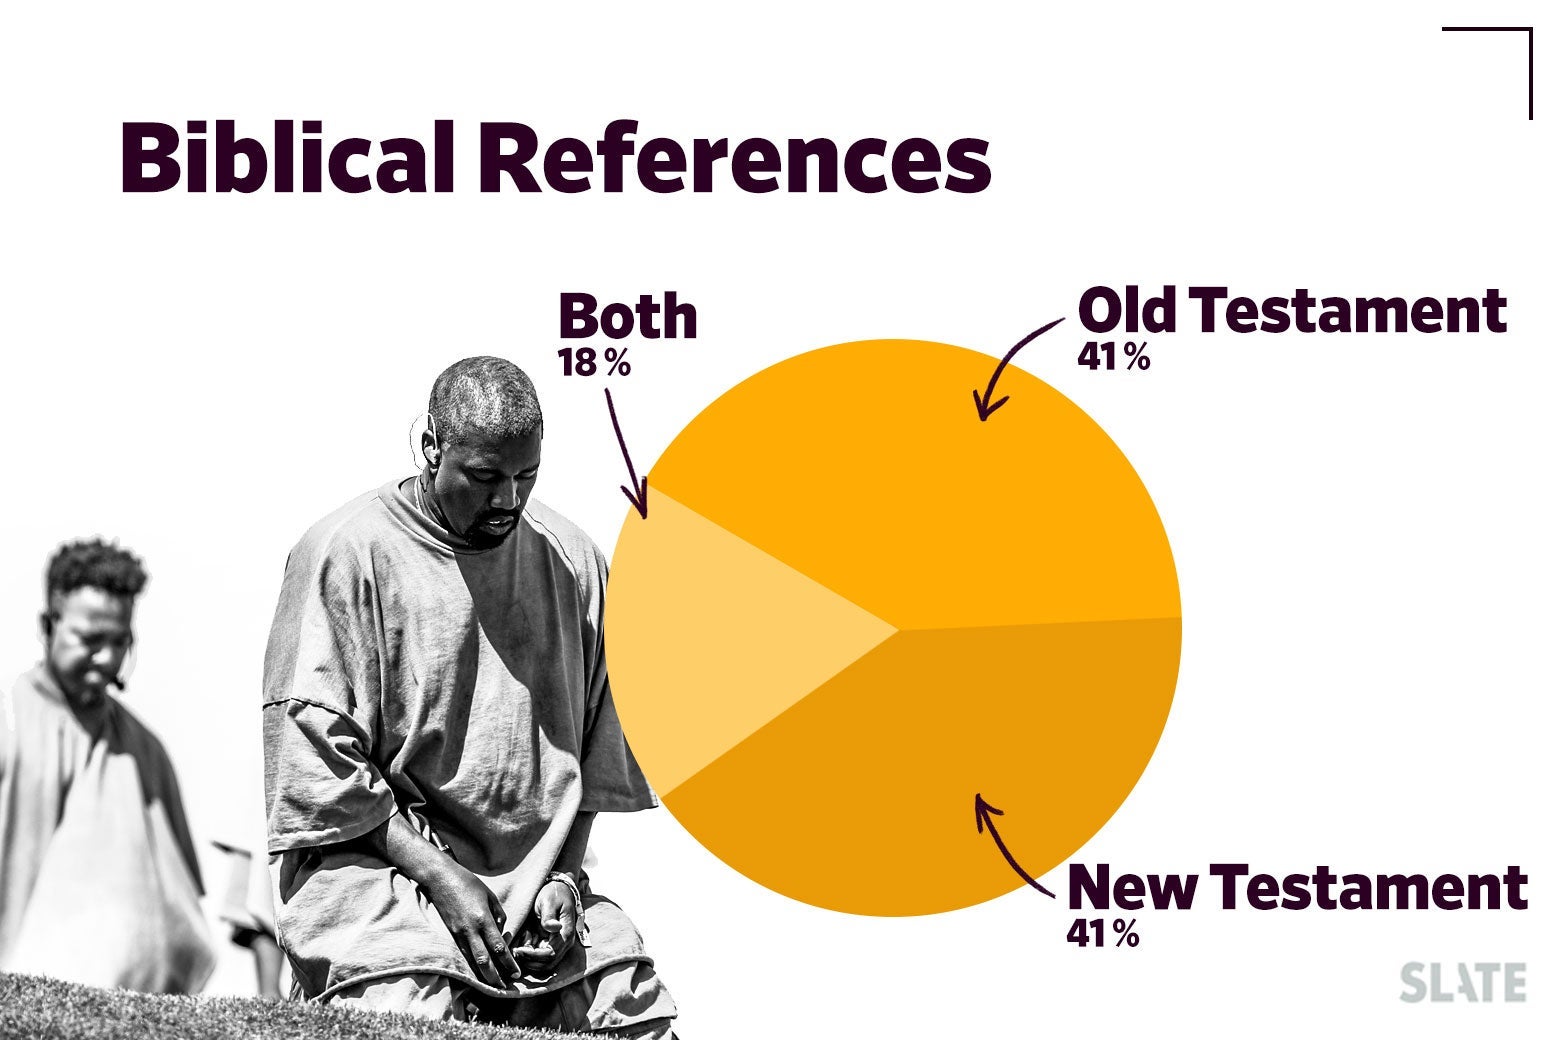 Kanye West and a pie chart counting Old Testament versus New Testament references.